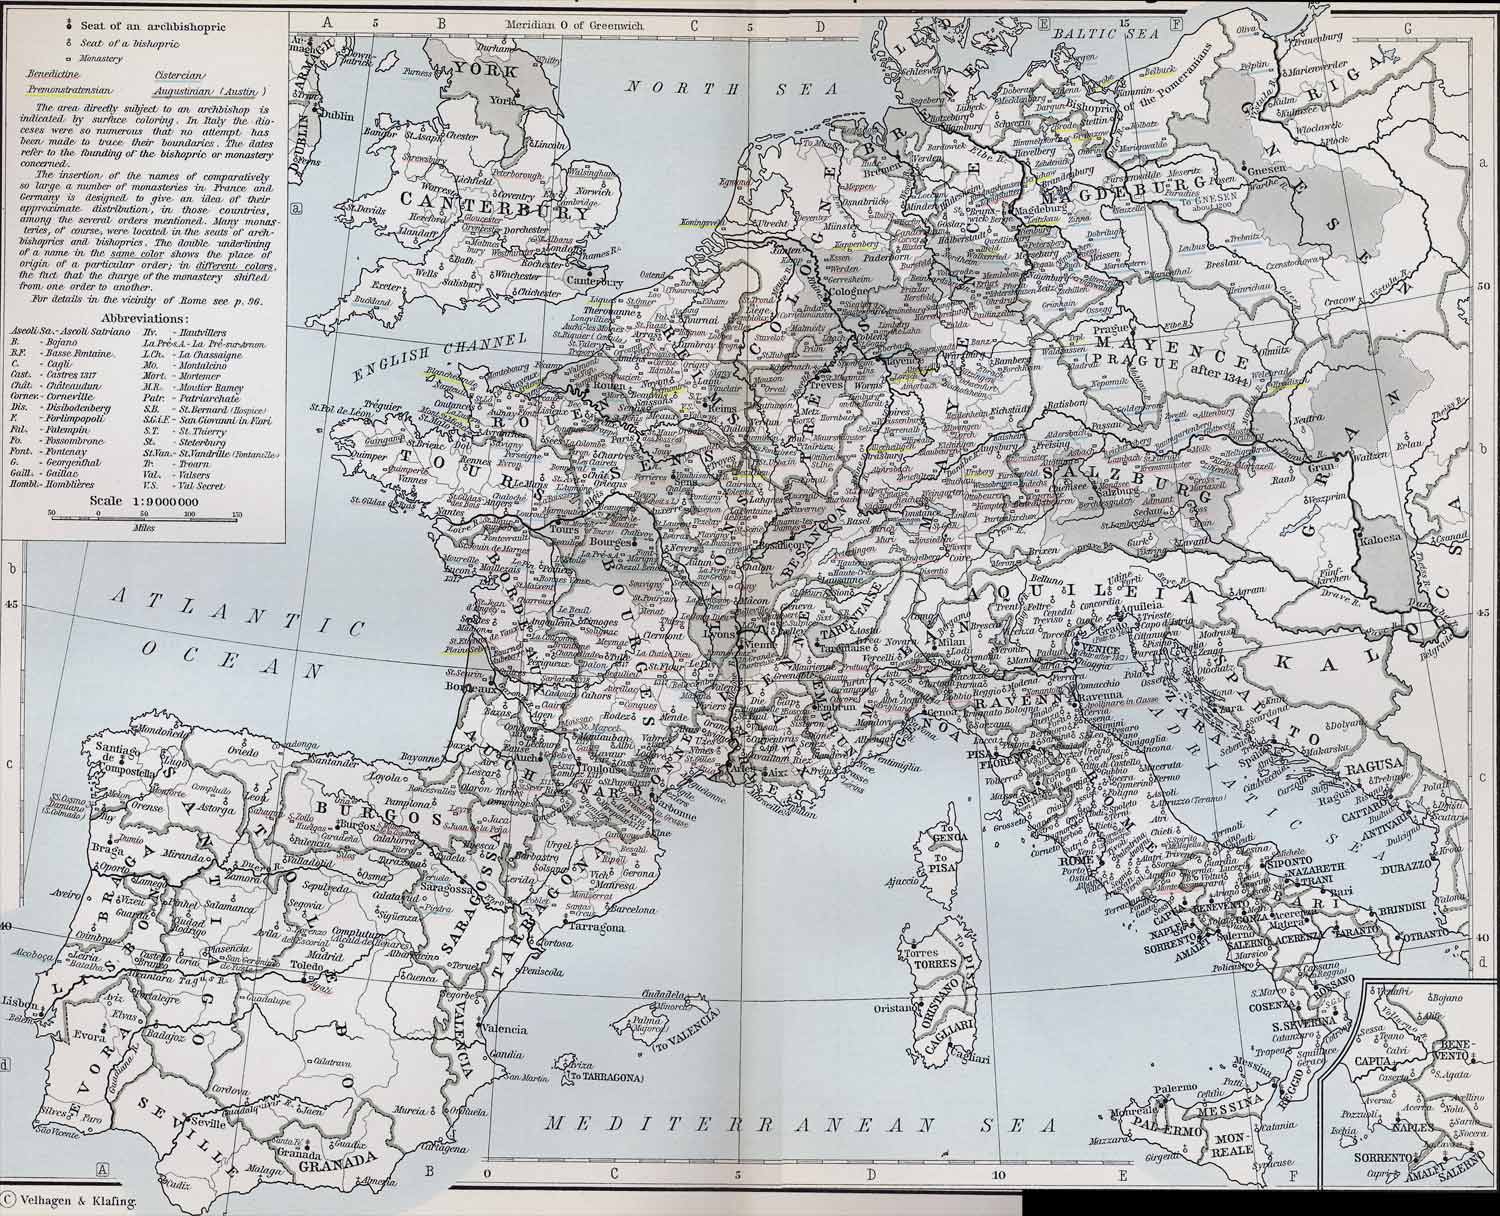 Ecclesiastical Map of Western Europe in the Middle Ages